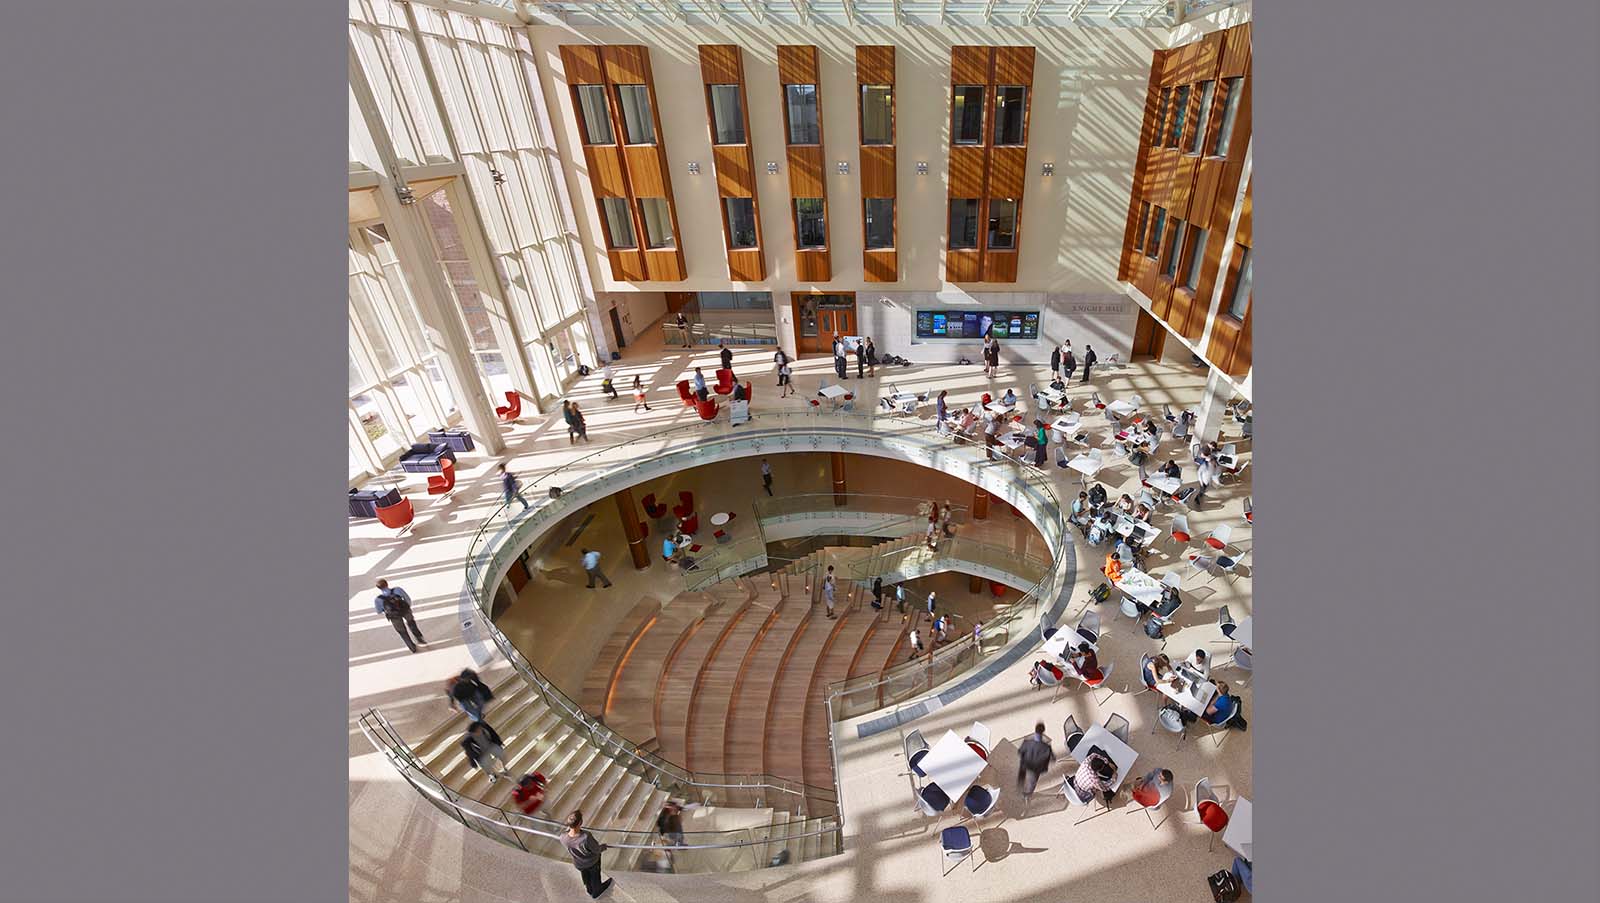 Olin School of Business, Washington University. Lobby Area with open air lecture space